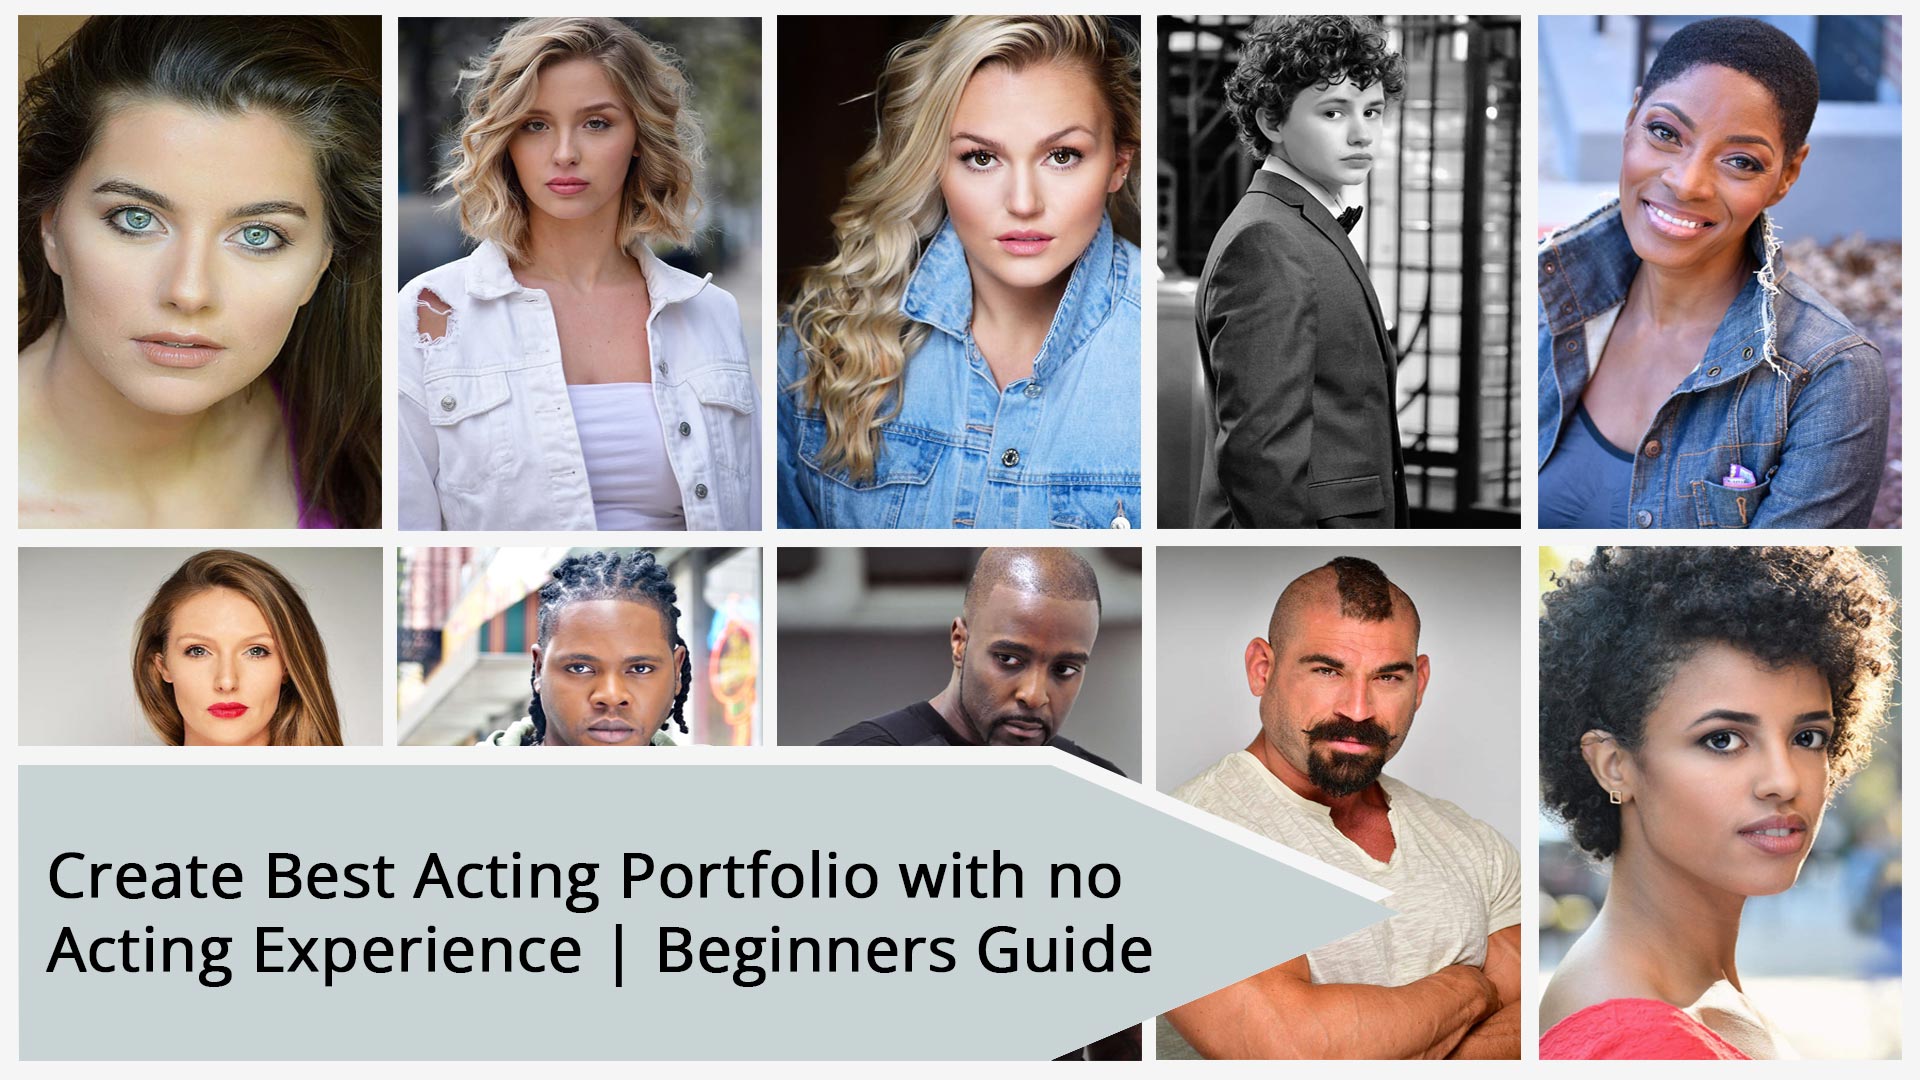 Create Best Acting Portfolio with no Acting Experience| Beginners Guide